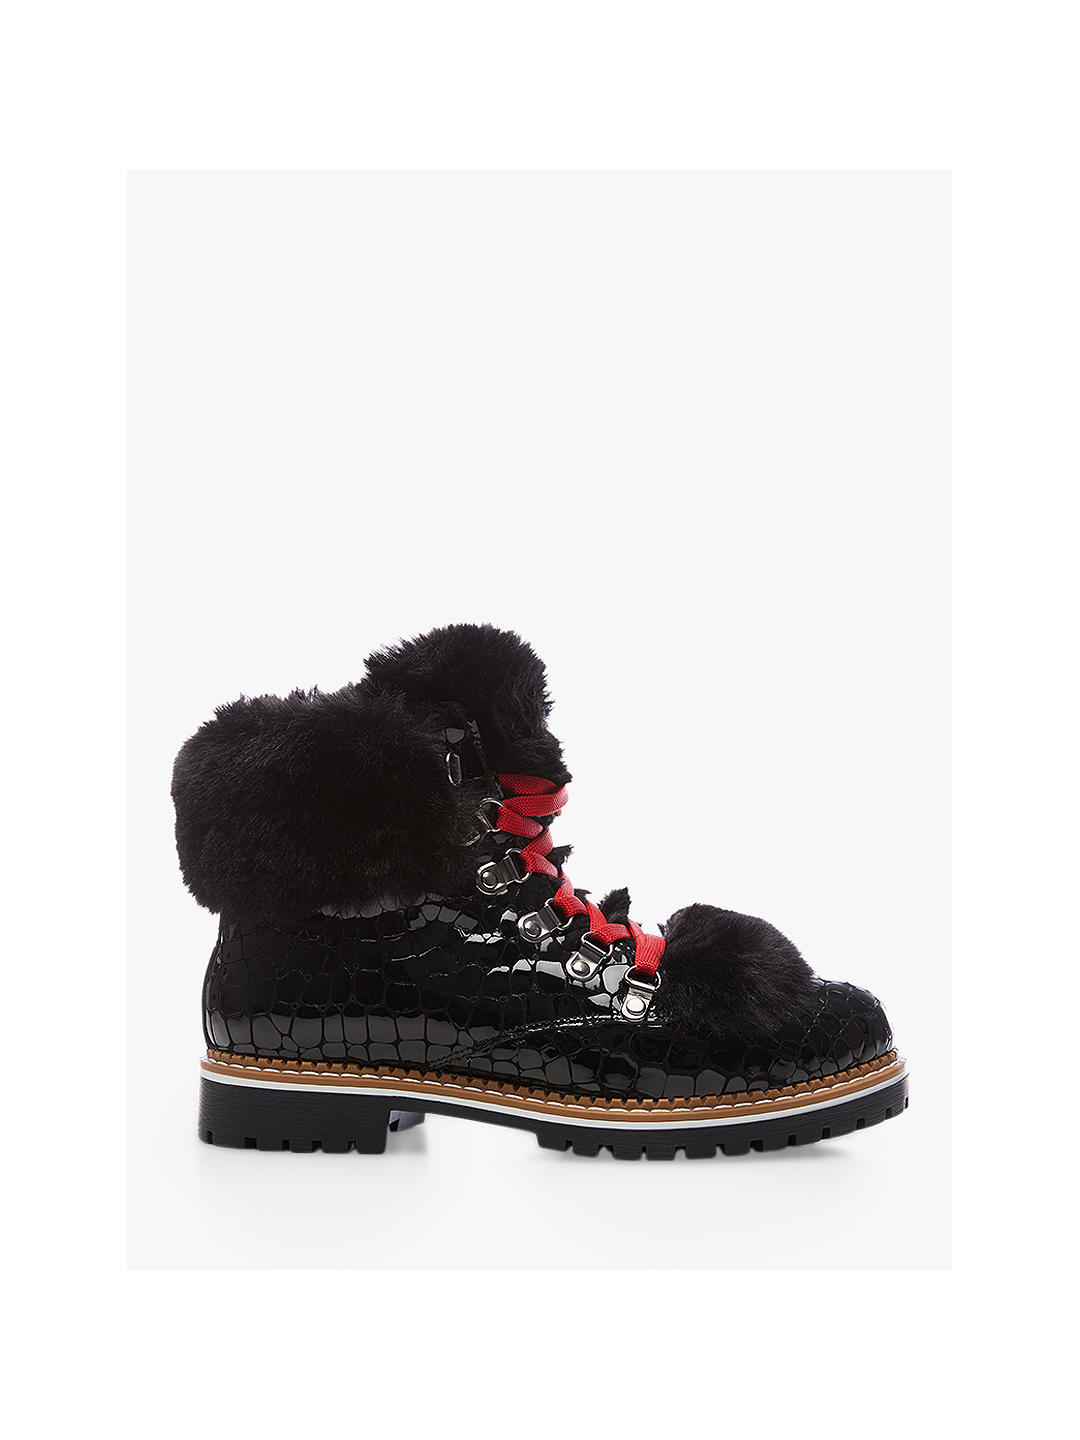 Moda in Pelle Cayden Croc Lace Up Boots, Black